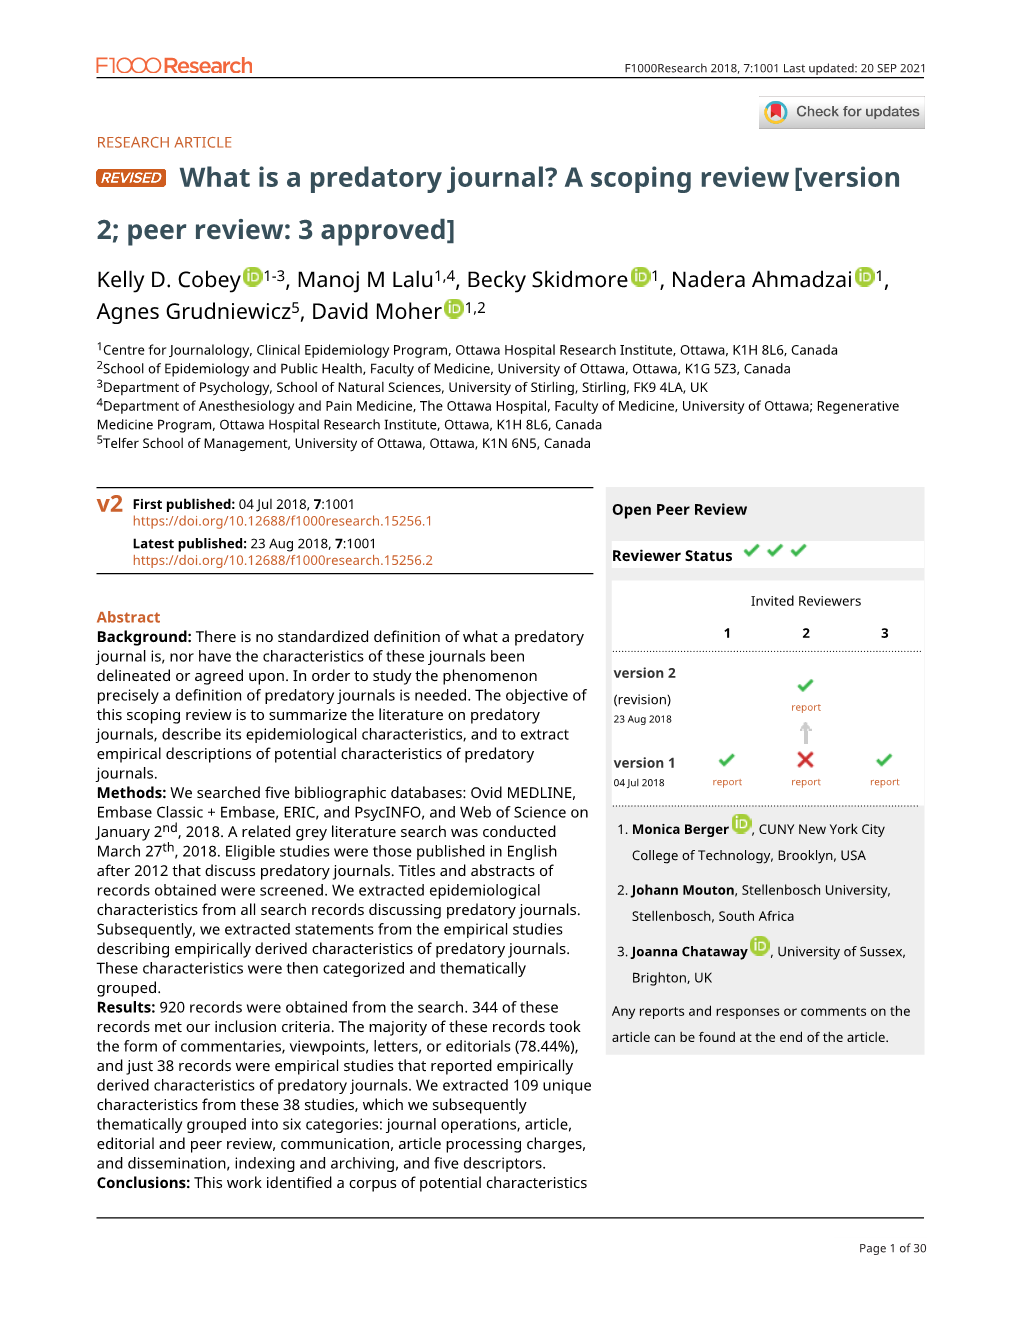 What Is a Predatory Journal? a Scoping Review[Version 2; Peer